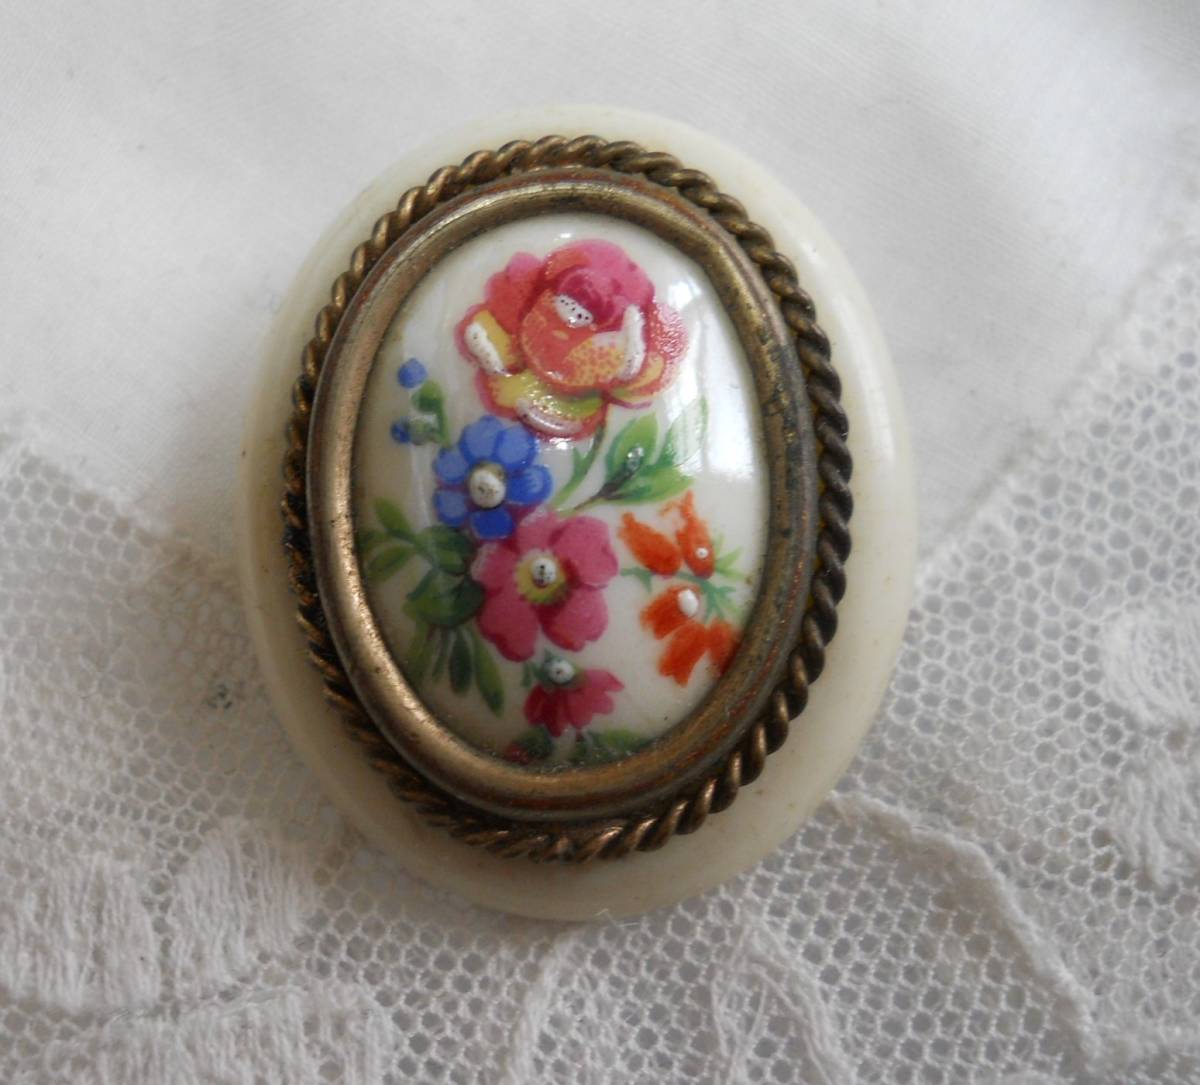 Antique French Limoges Ceramic brooch with hand-painted bouquet of flowers French celluloid frame, ladies accessories, brooch, others